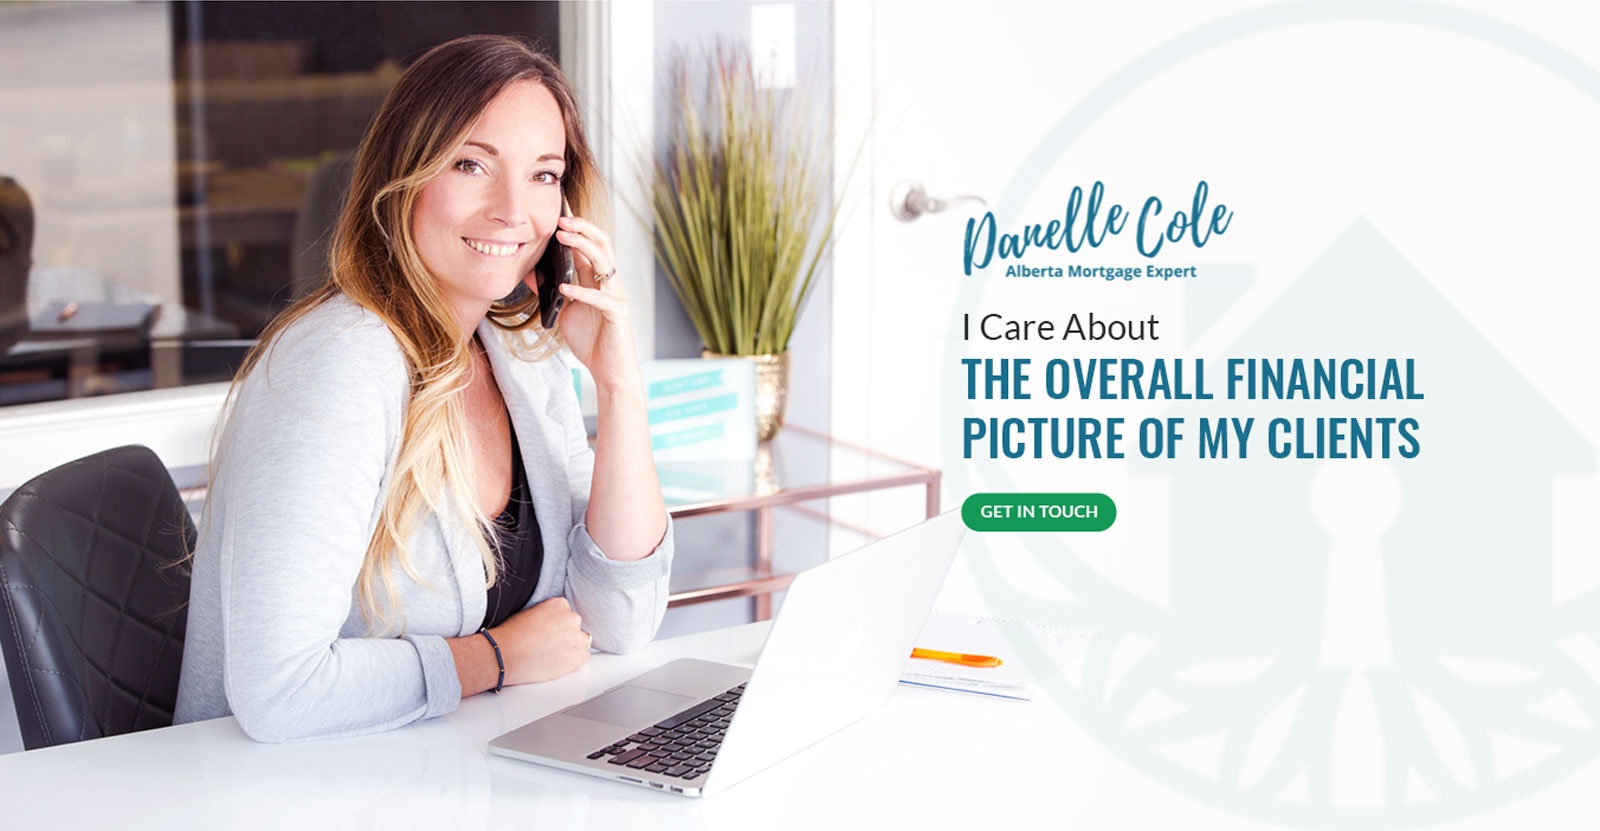 Alberta Mortgage Expert - Danelle Cole - The Place To Mortgage Inc.